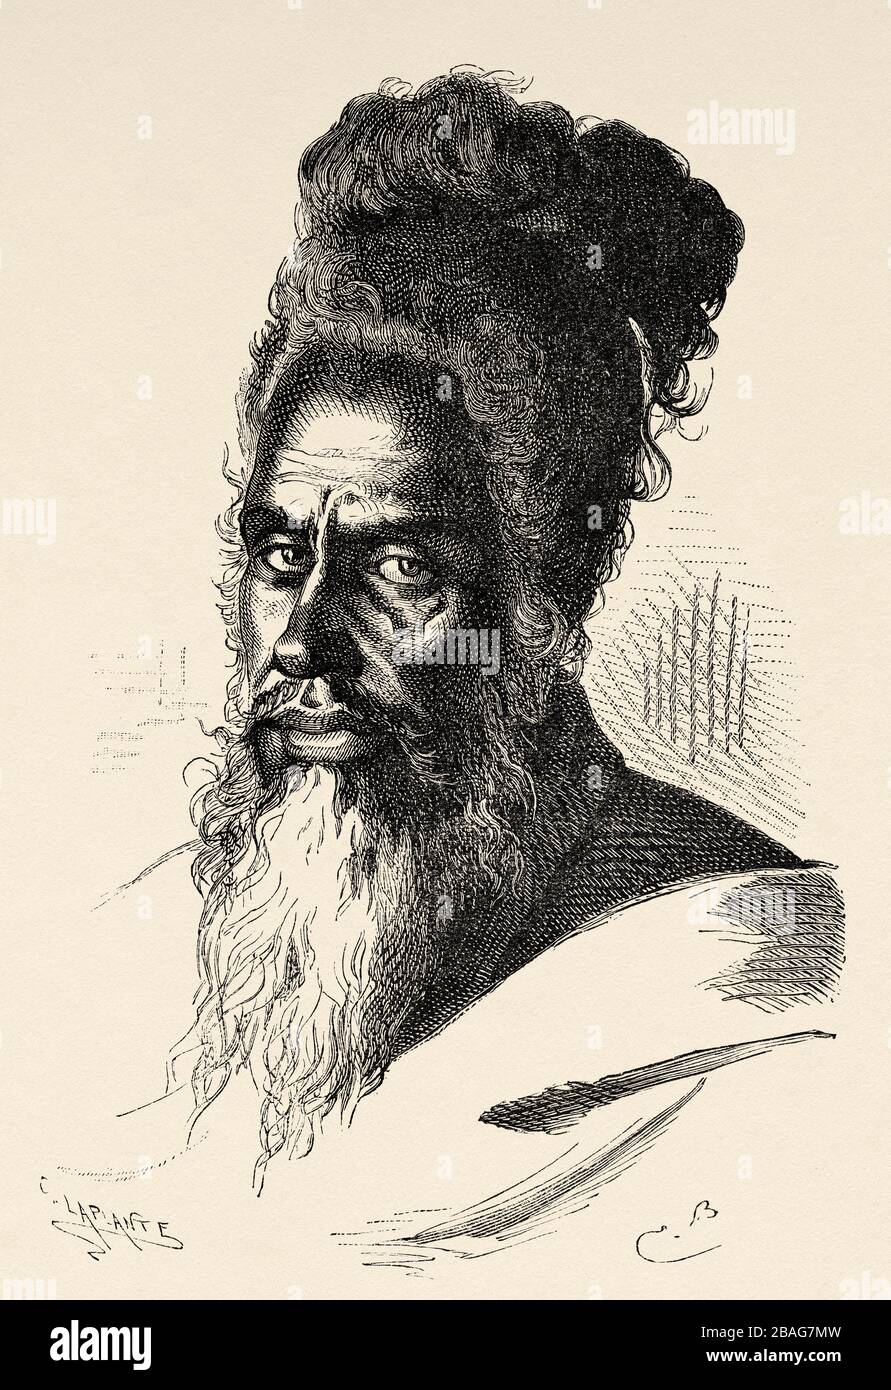 Portrait of an Indian fakir man, from Travels in central Asia 1863 by Armin Vambery. Old engraving El Mundo en la Mano 1878 Stock Photo